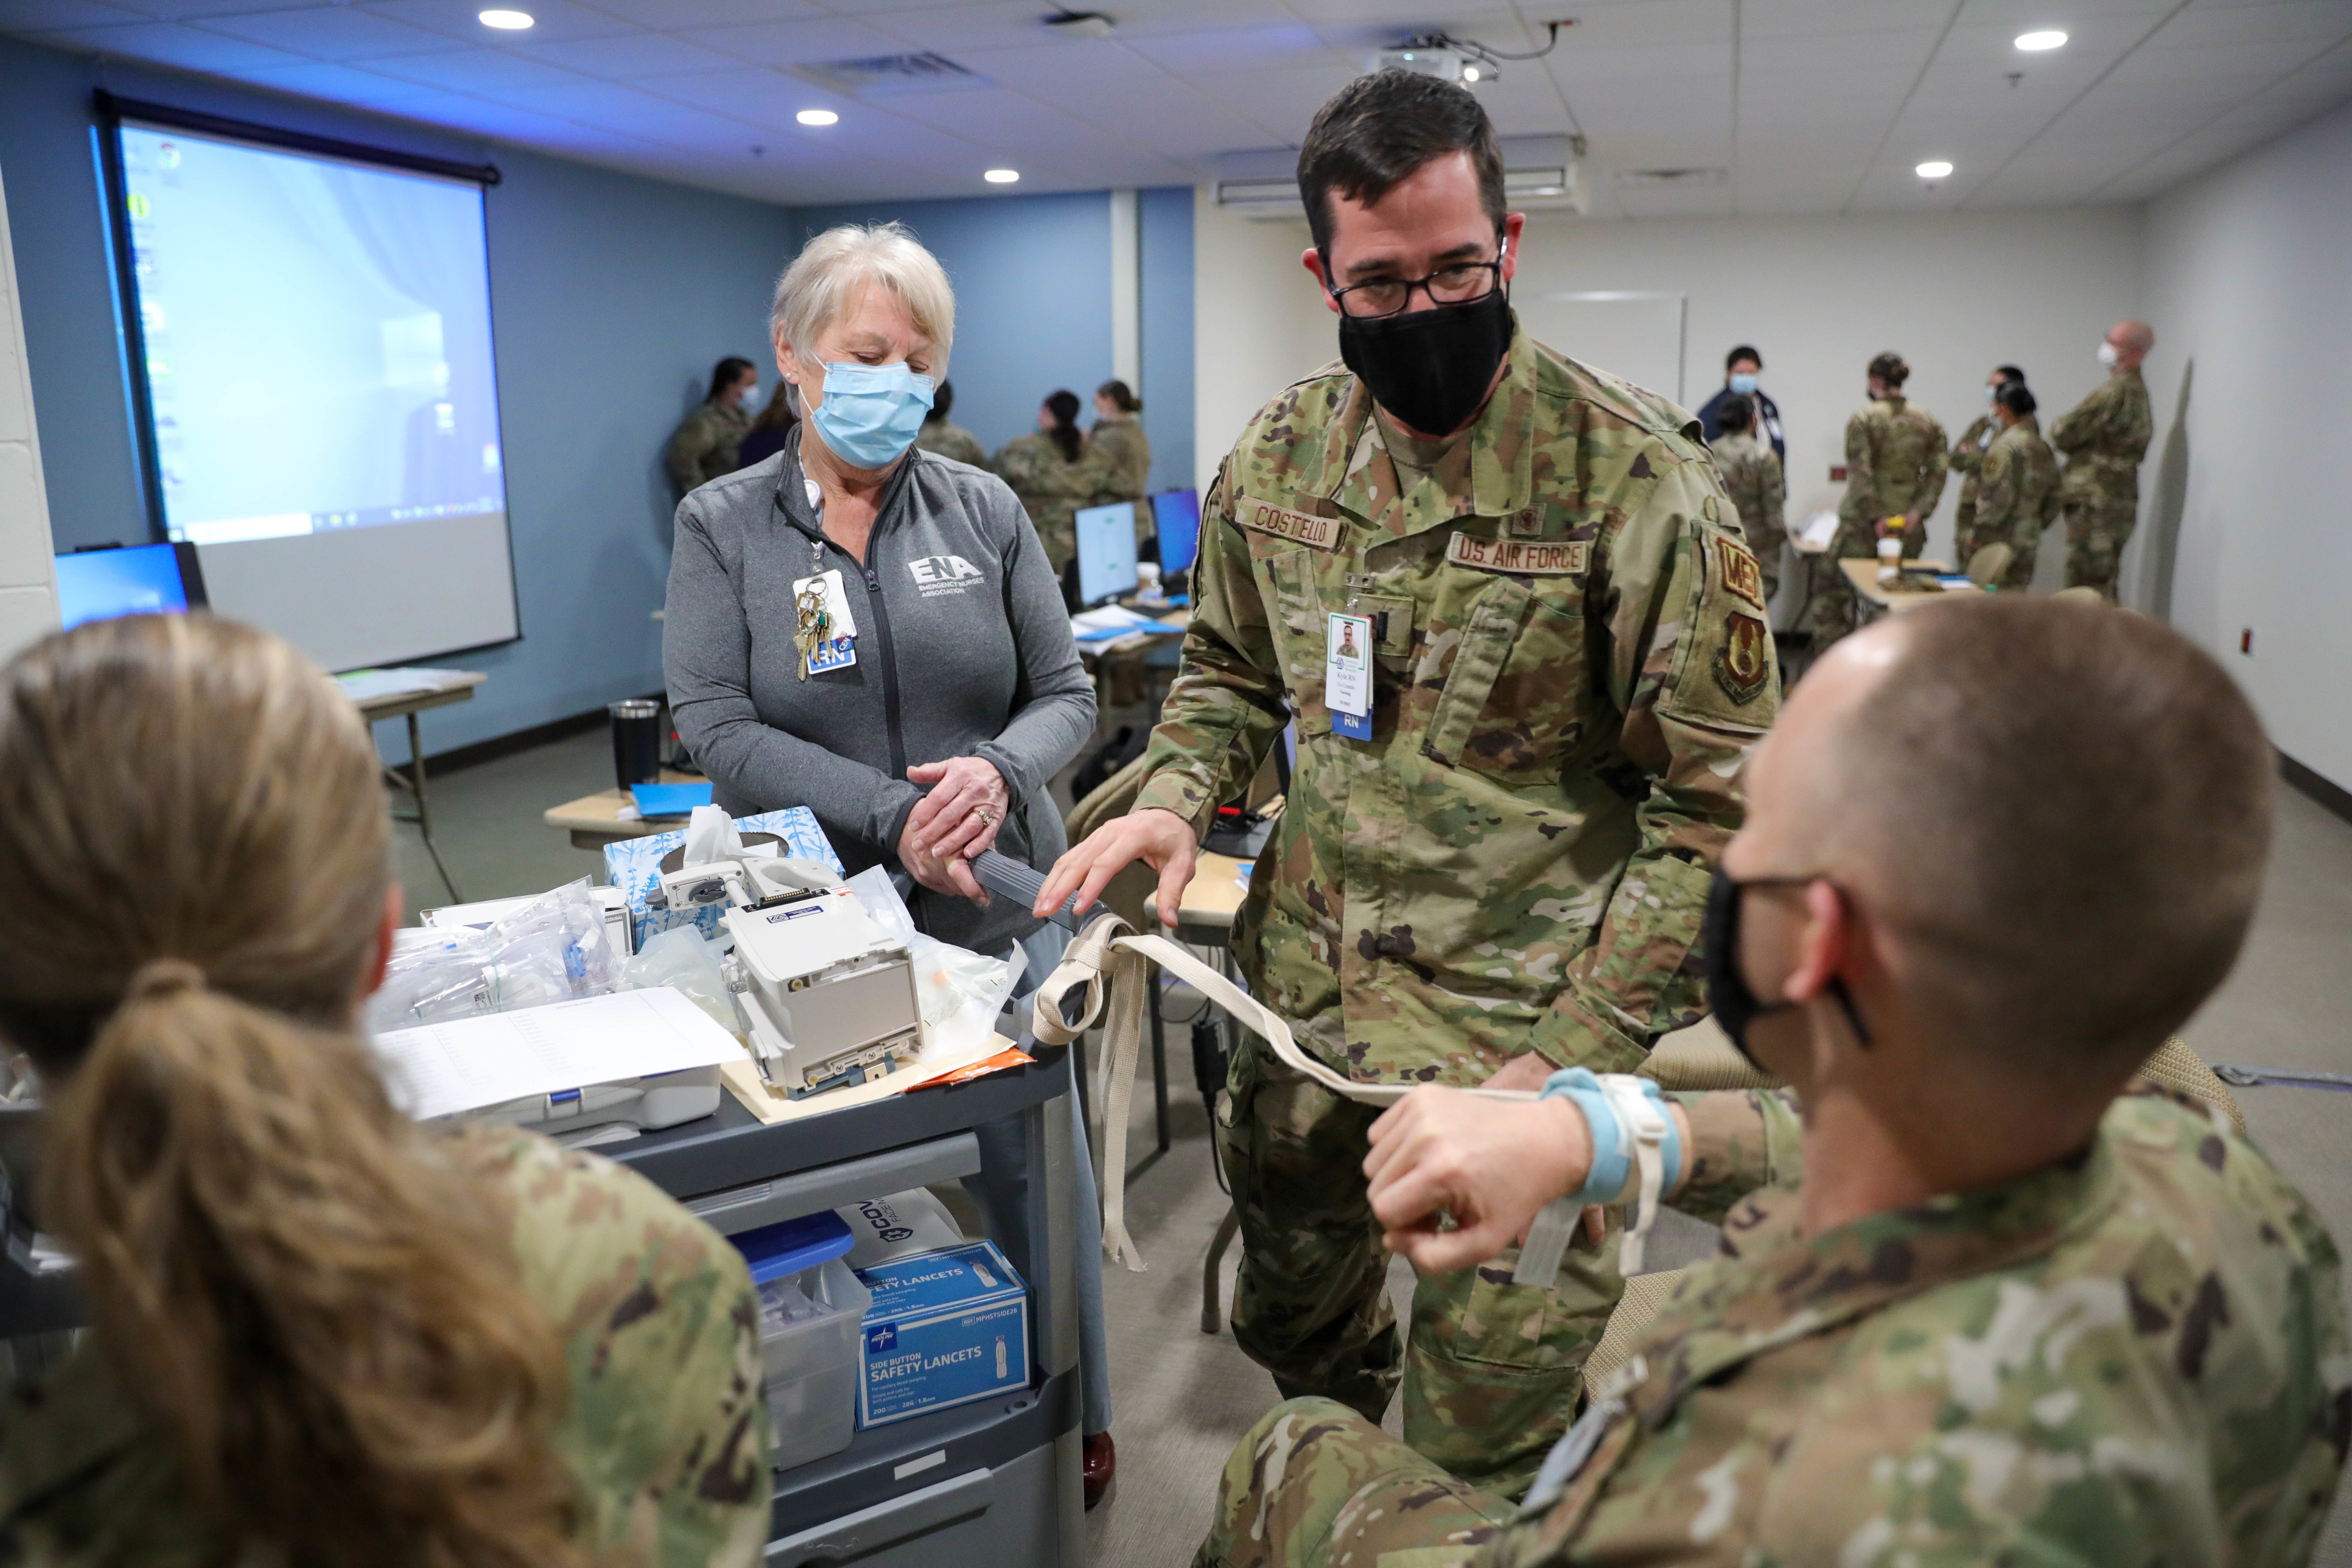 Air Force medical team comes to assist health care workers at Lawrence General Hospital in Massachusetts